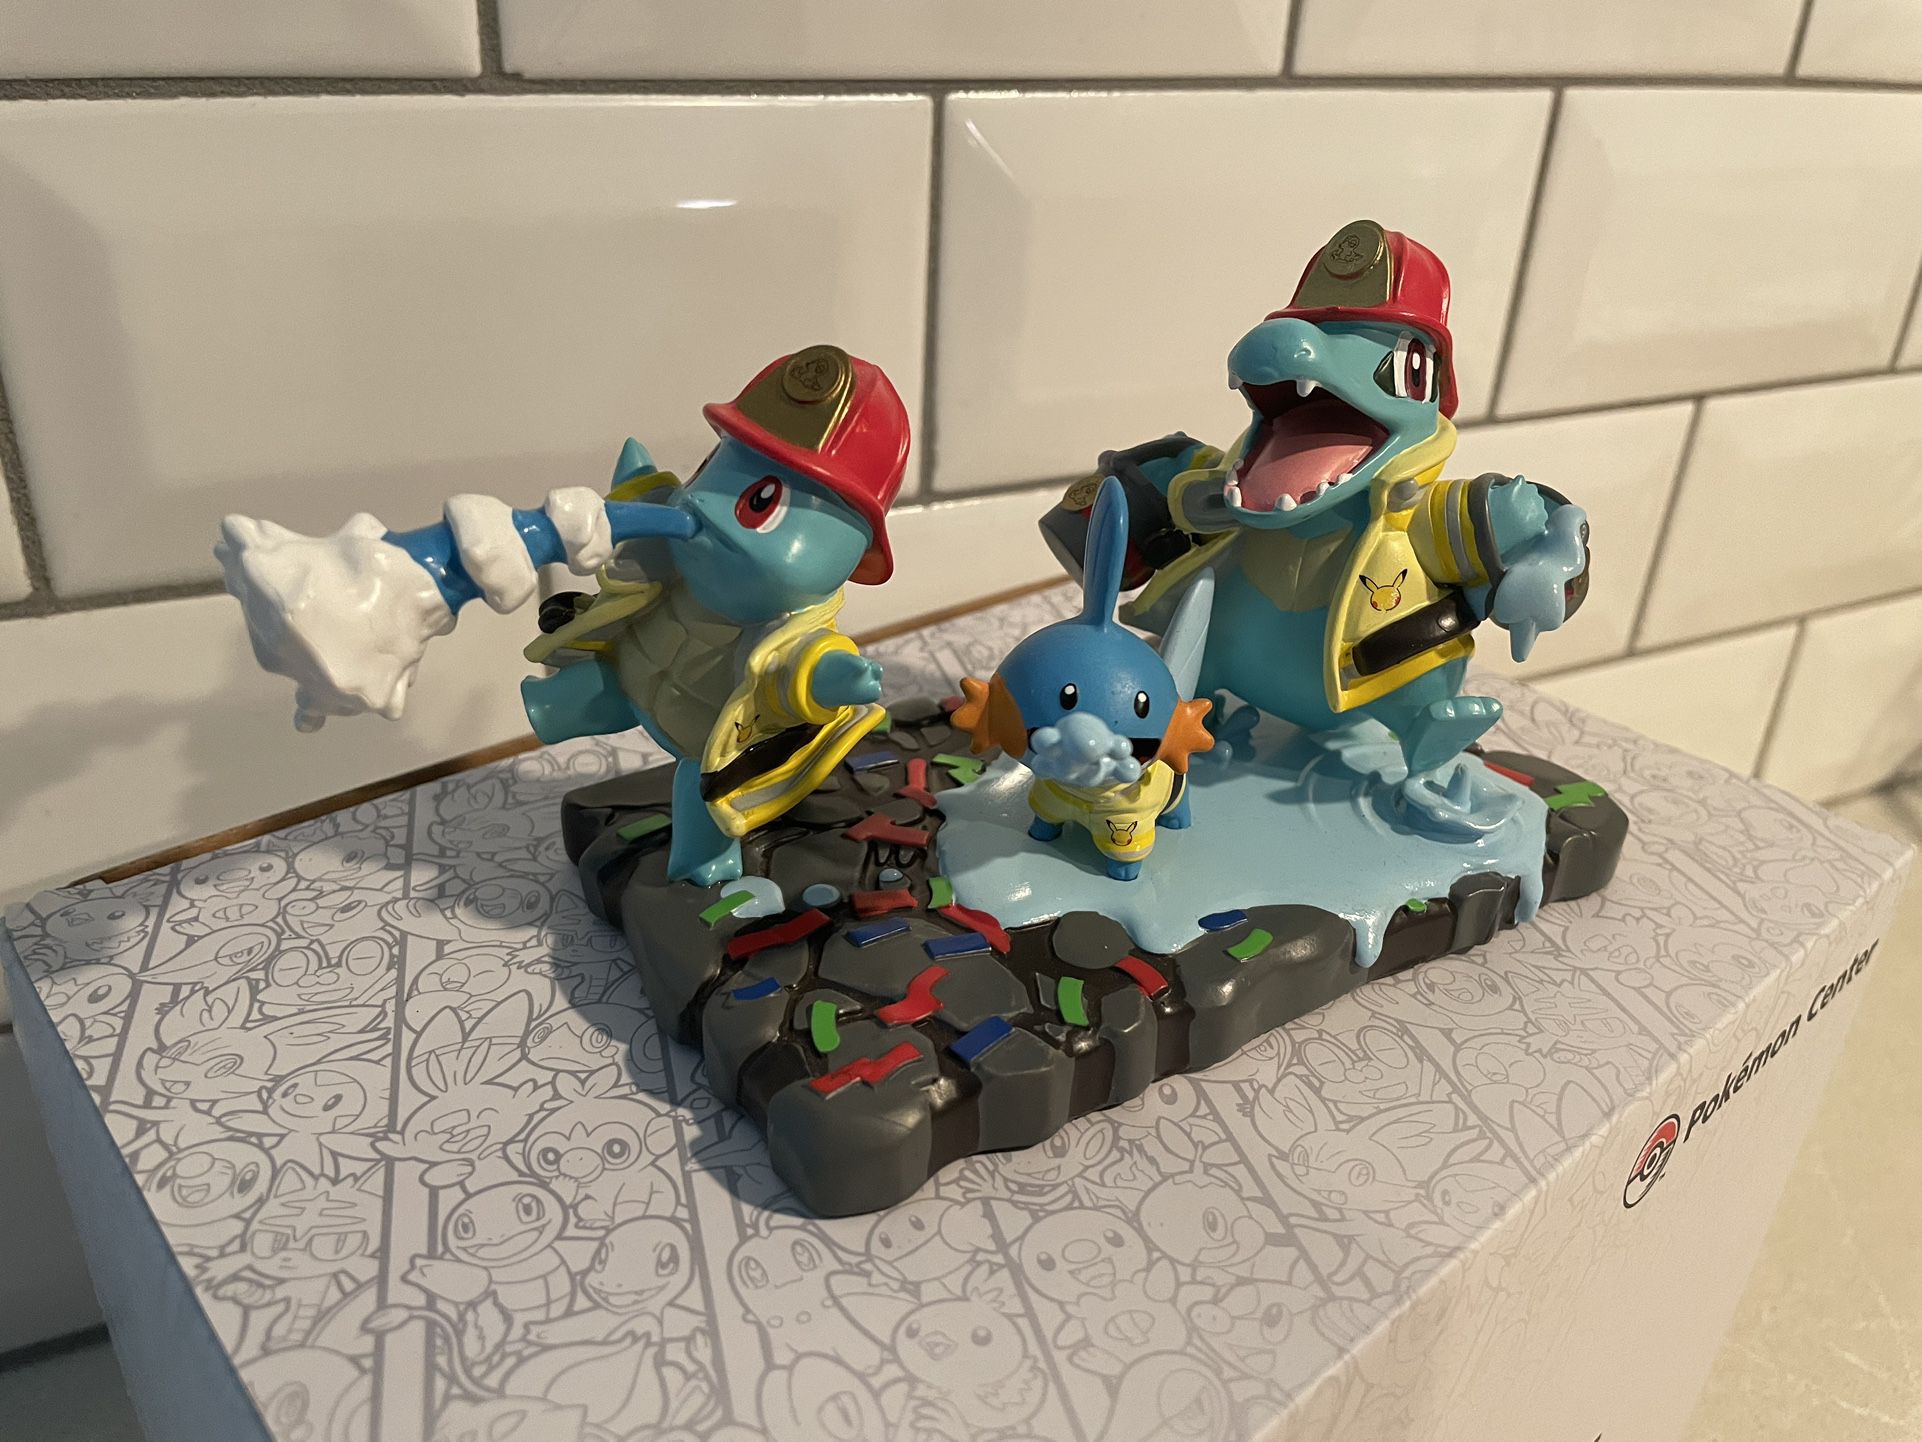 Squirtle Cooling Down the Crowd Parade Statue *BRAND NEW MINT* 25th Anniversary Pokemon Mudkip Totodile Pokémon Figure